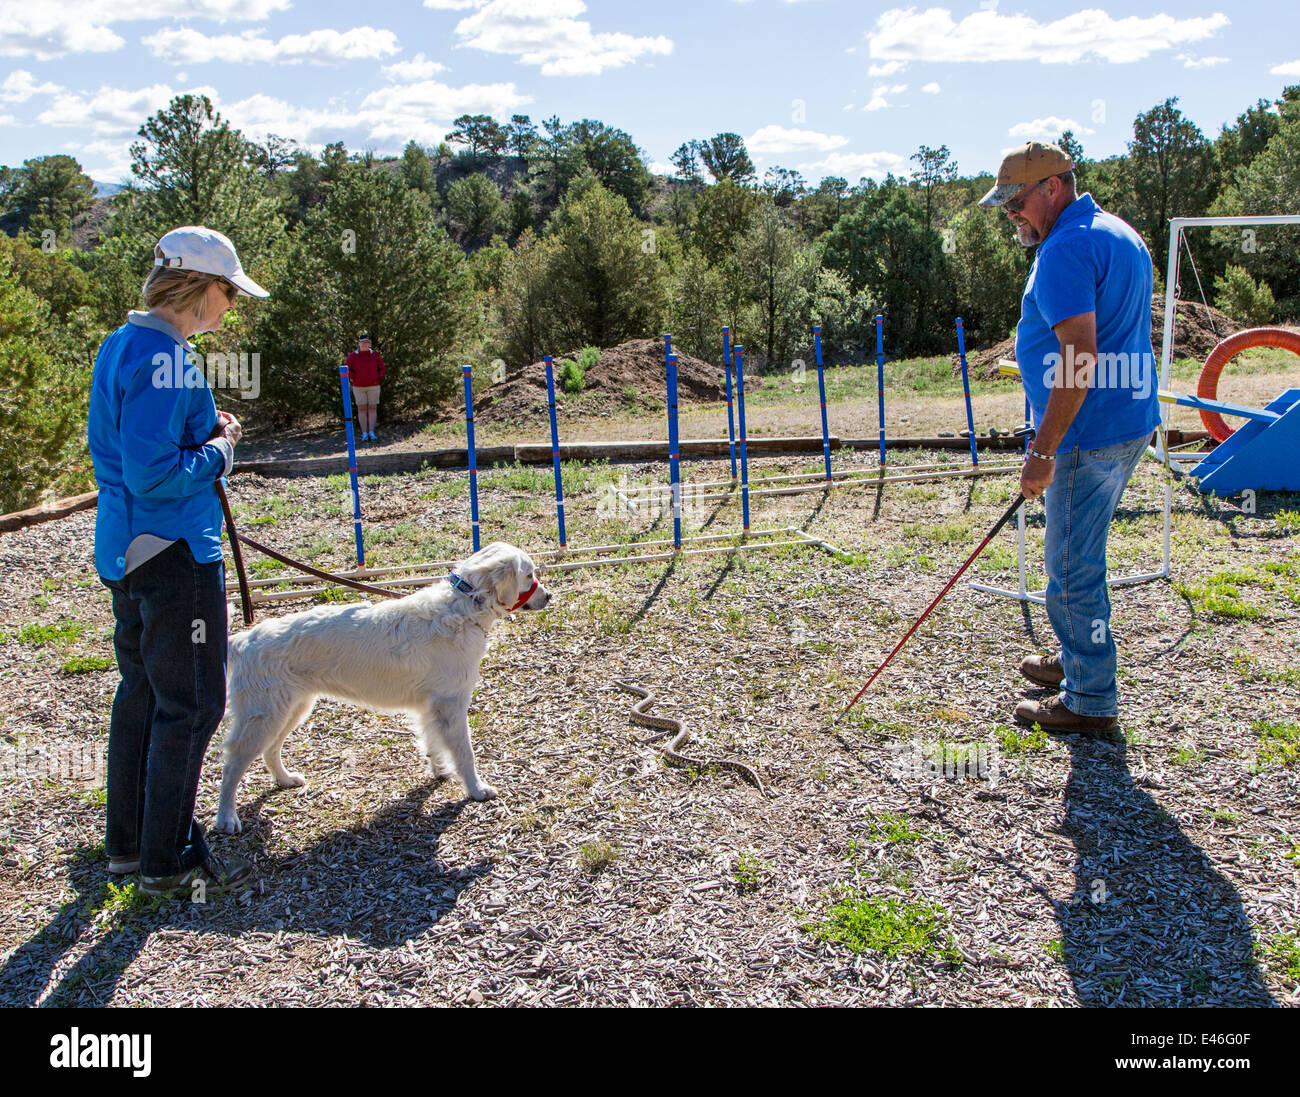 Male trainer and female owner with platinum colored Golden Retriever dog in rattlesnake avoidance workshop. Stock Photo